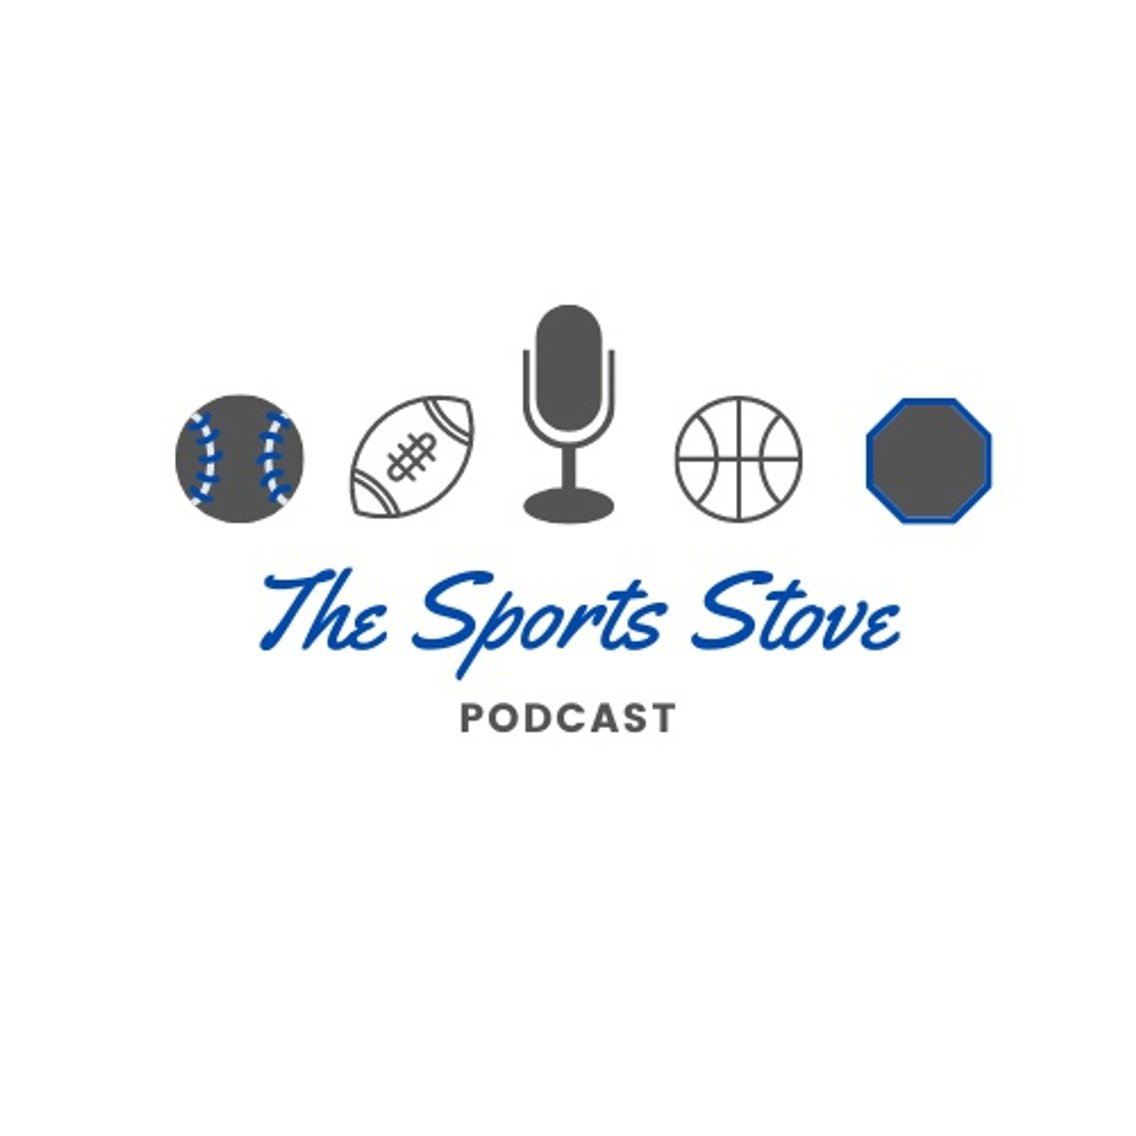 The Sports Stove Podcast - Cover Image